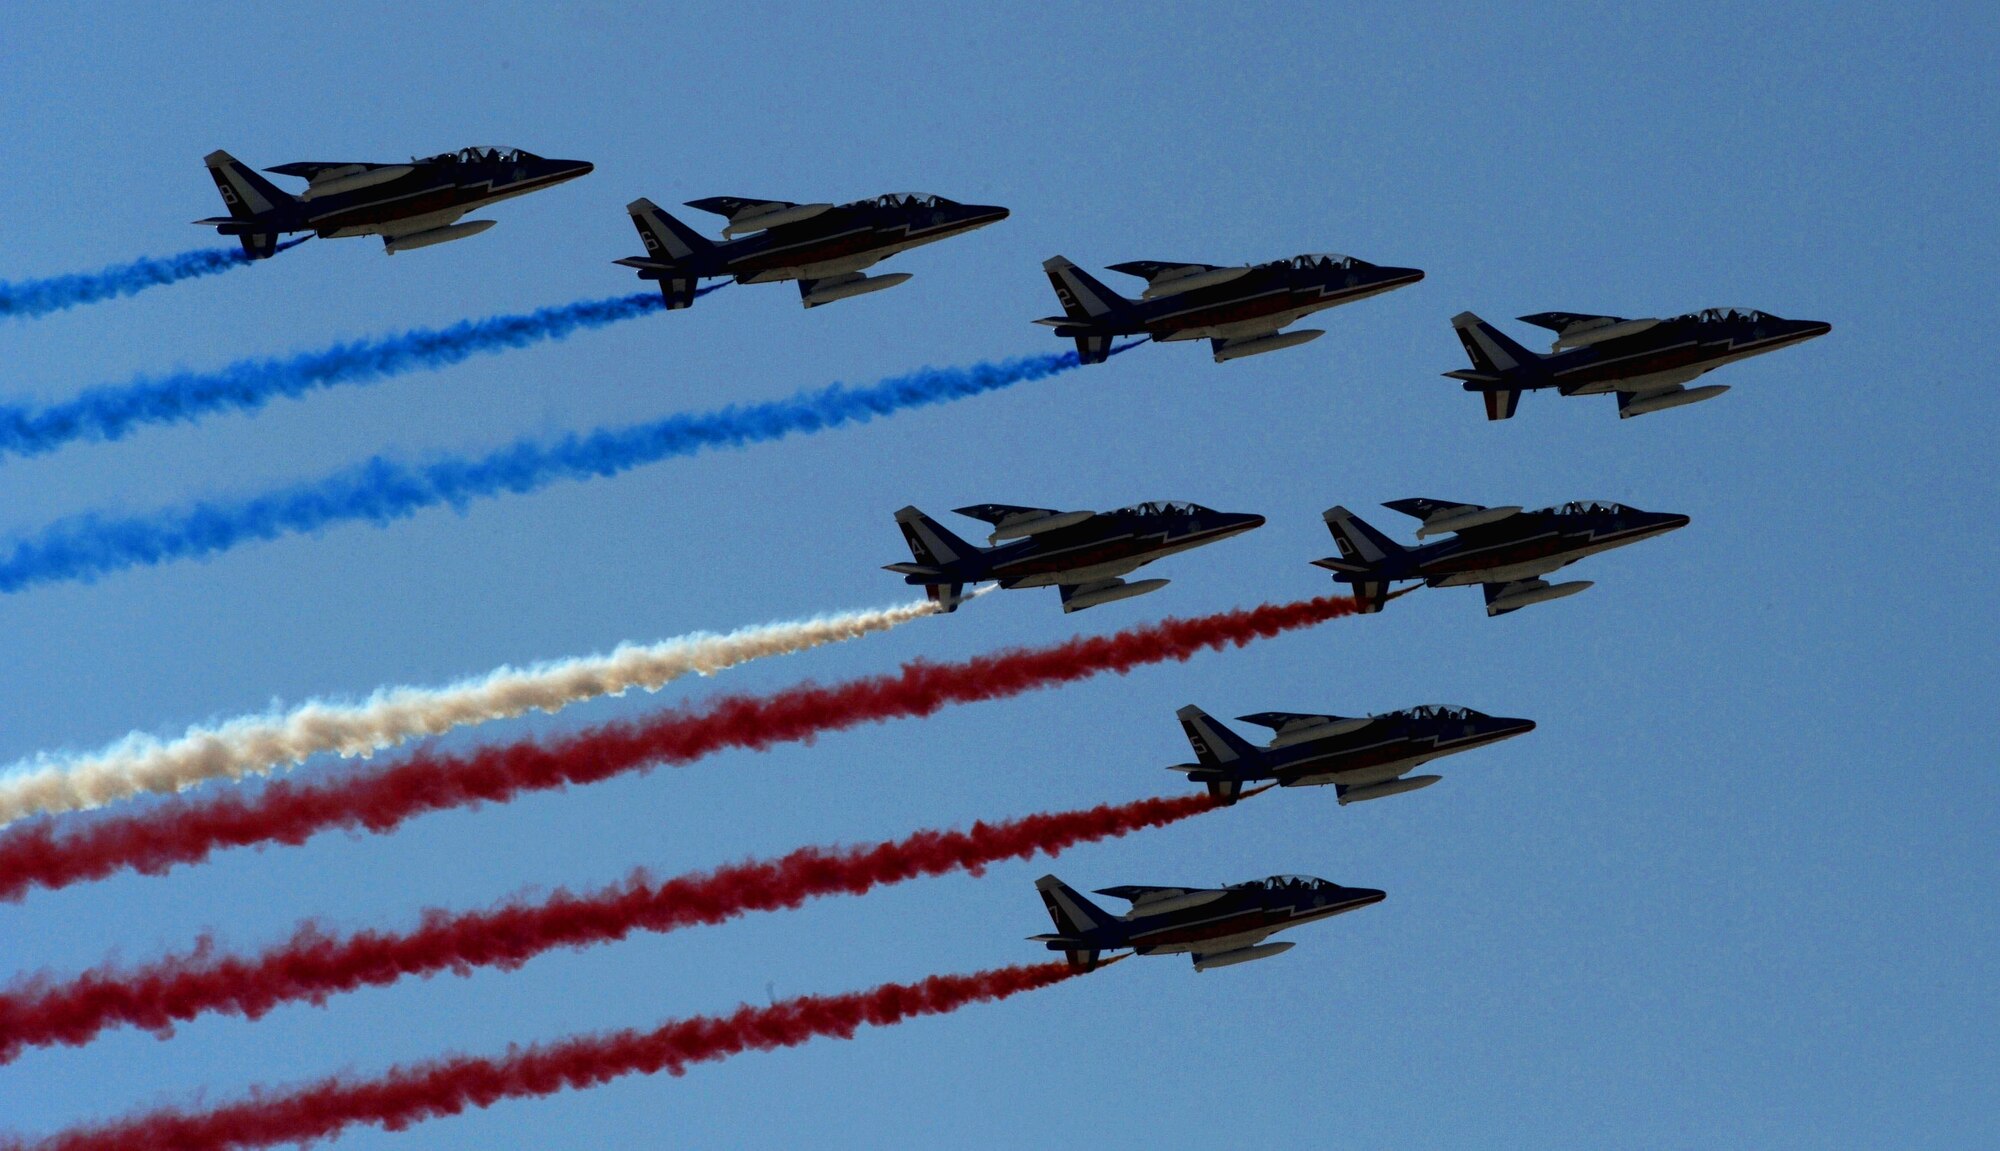 The French Air Force demonstation team, Patrouille de France, starts Bahrain's inaugural airshow with a flyby displaying their national colors, Jan. 23, 2010. (U.S. Air Force photo/ Staff Sgt. Angelita Lawrence/released)

